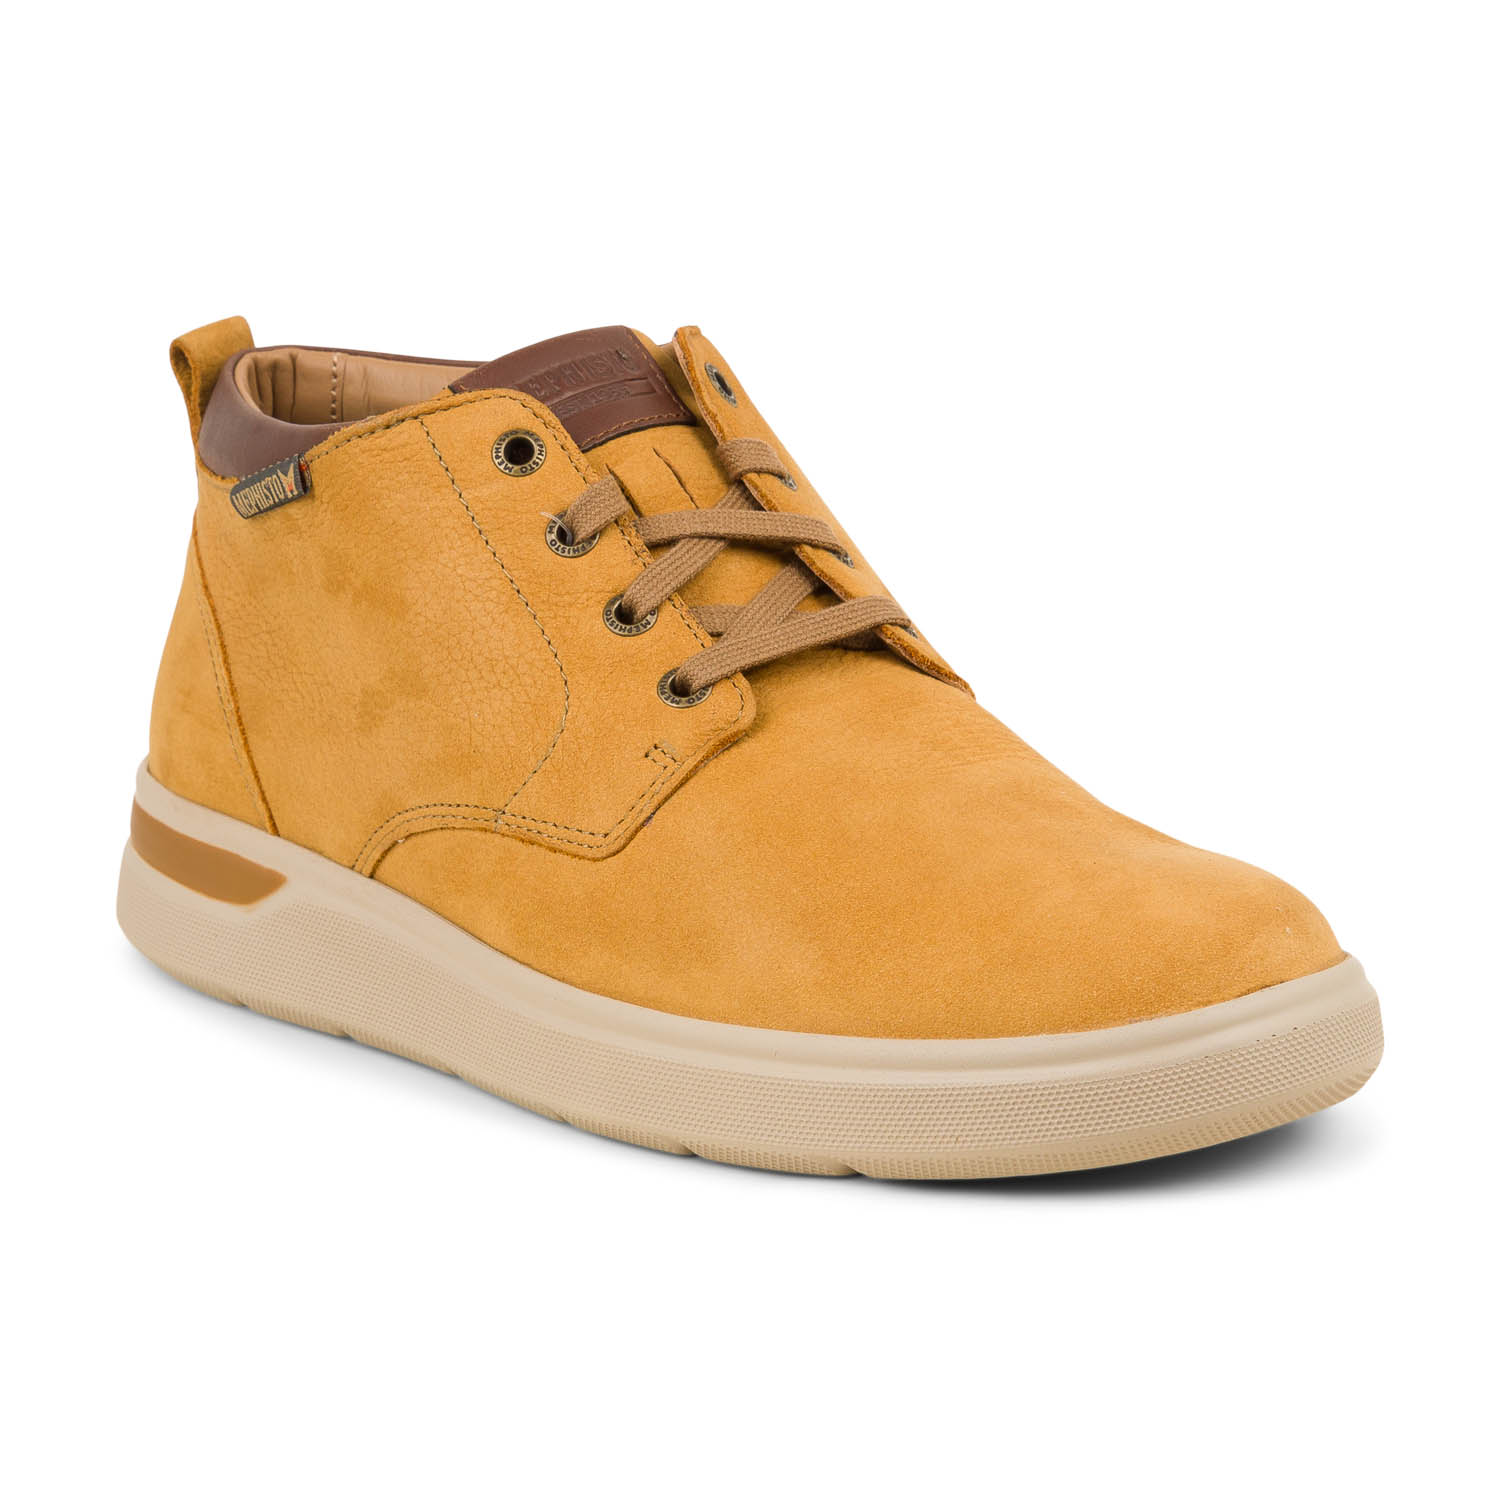 02 - OLMER - MEPHISTO - Chaussures à lacets - Nubuck